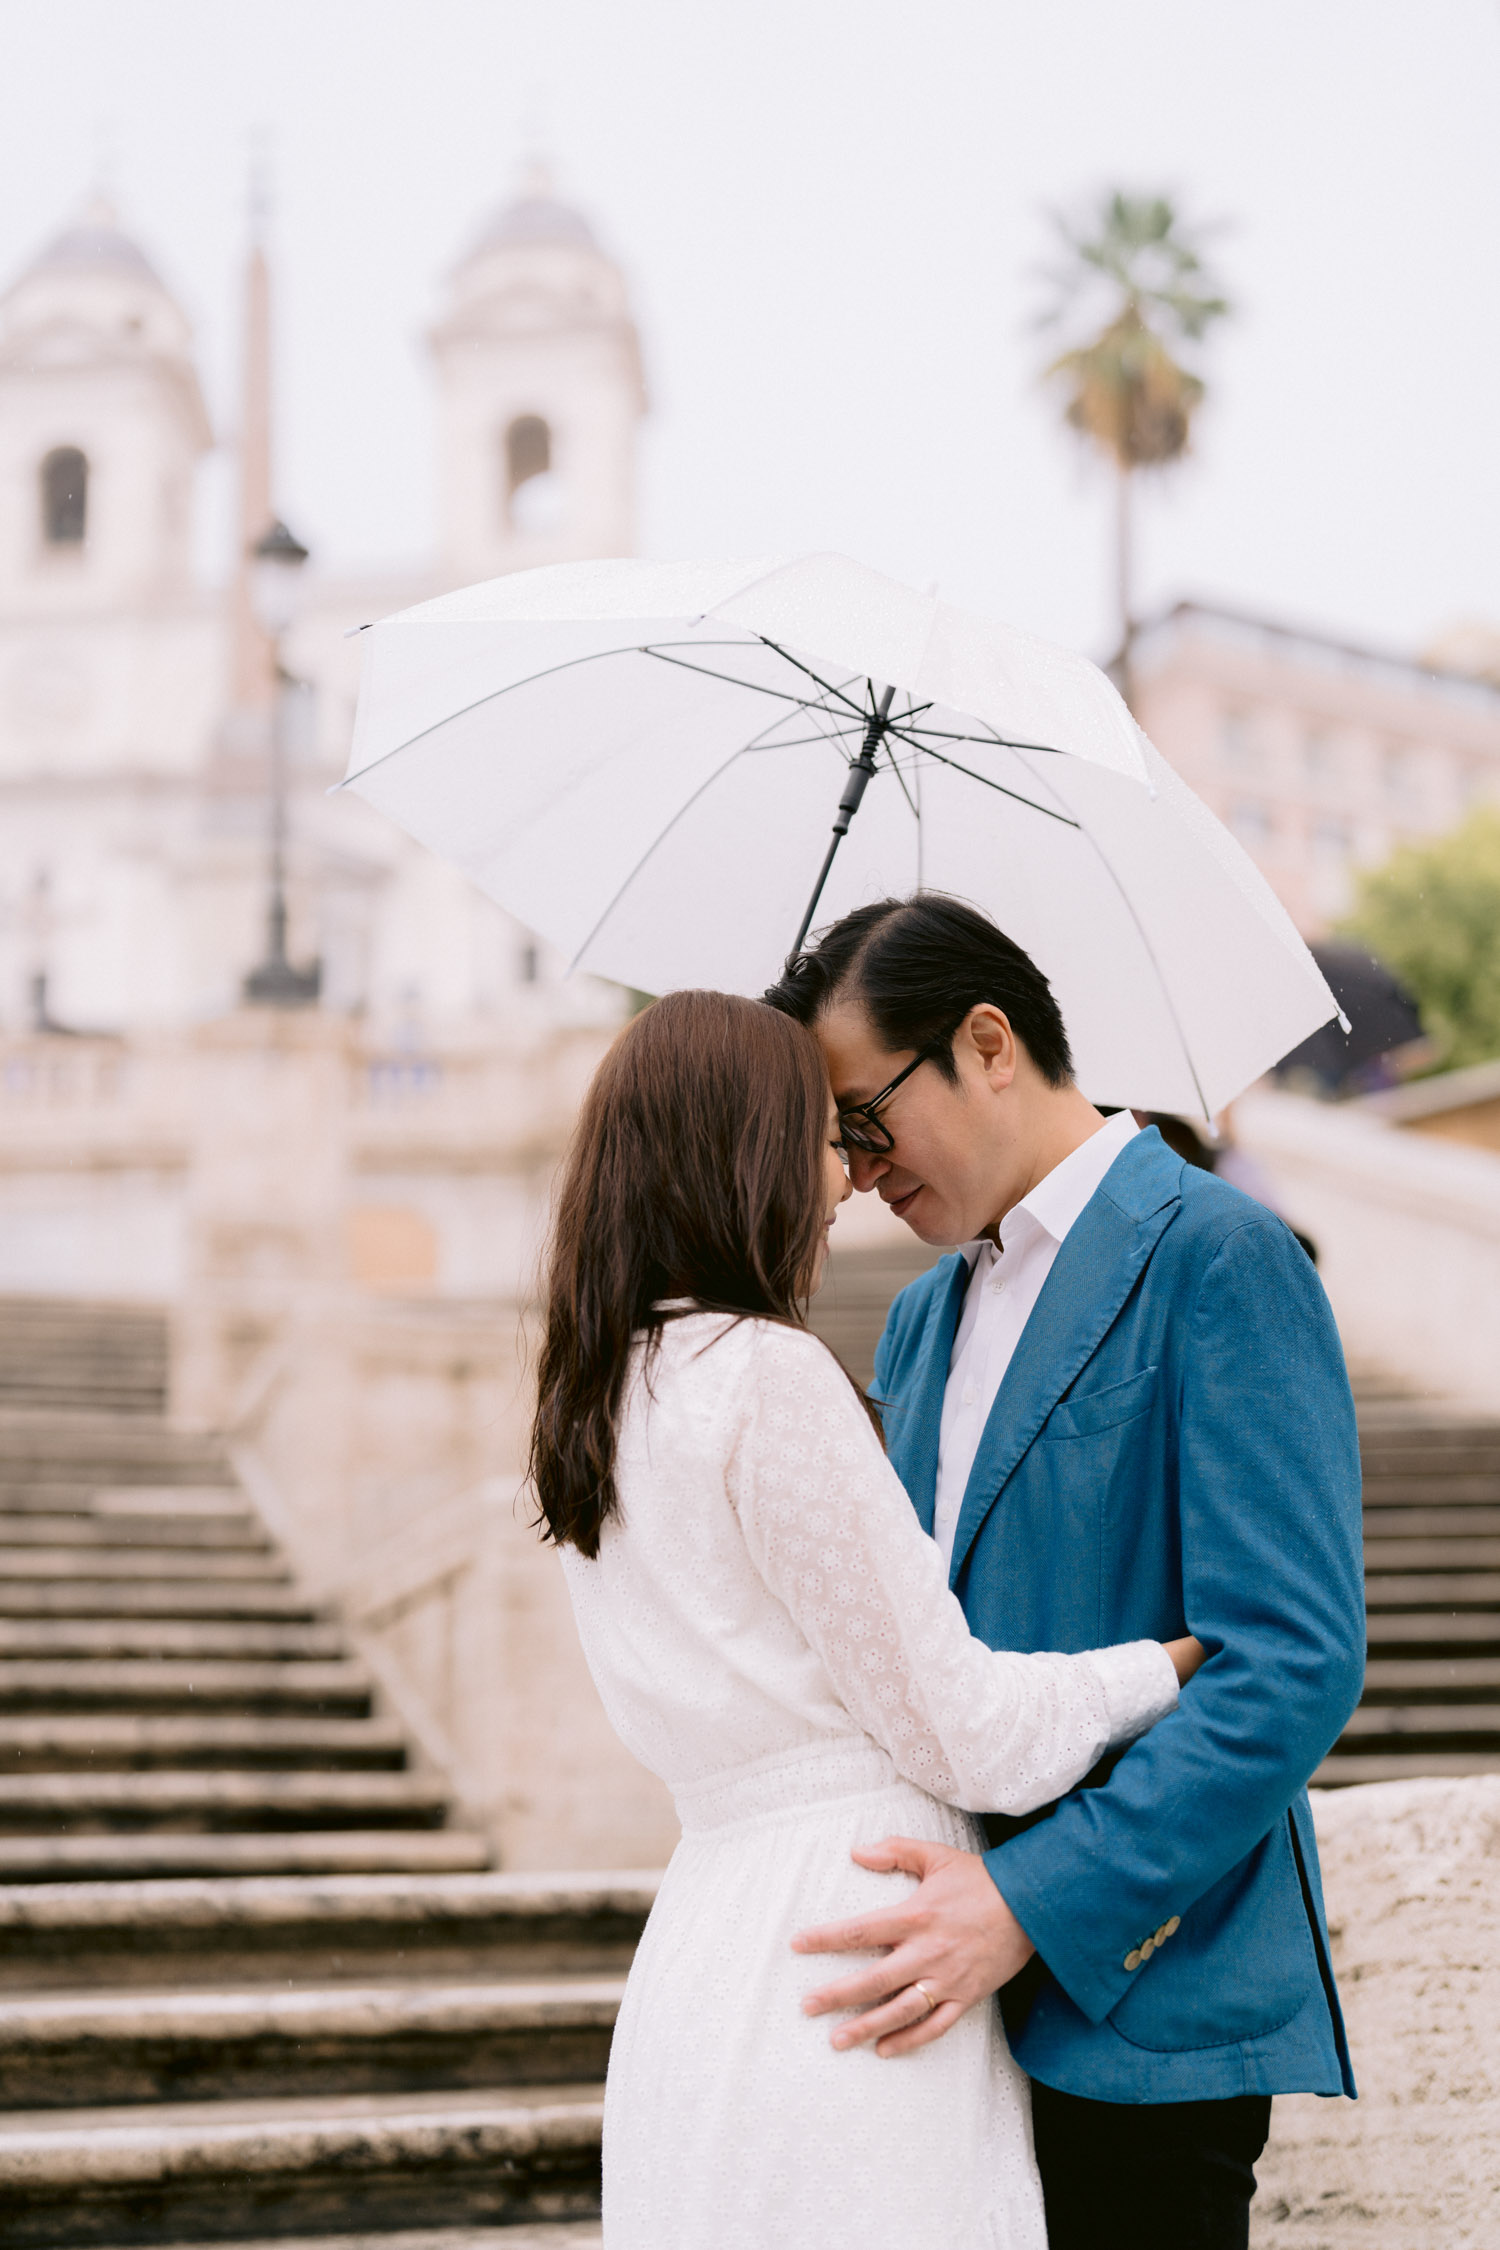 Romantic photoshoot in Rome at rainty day